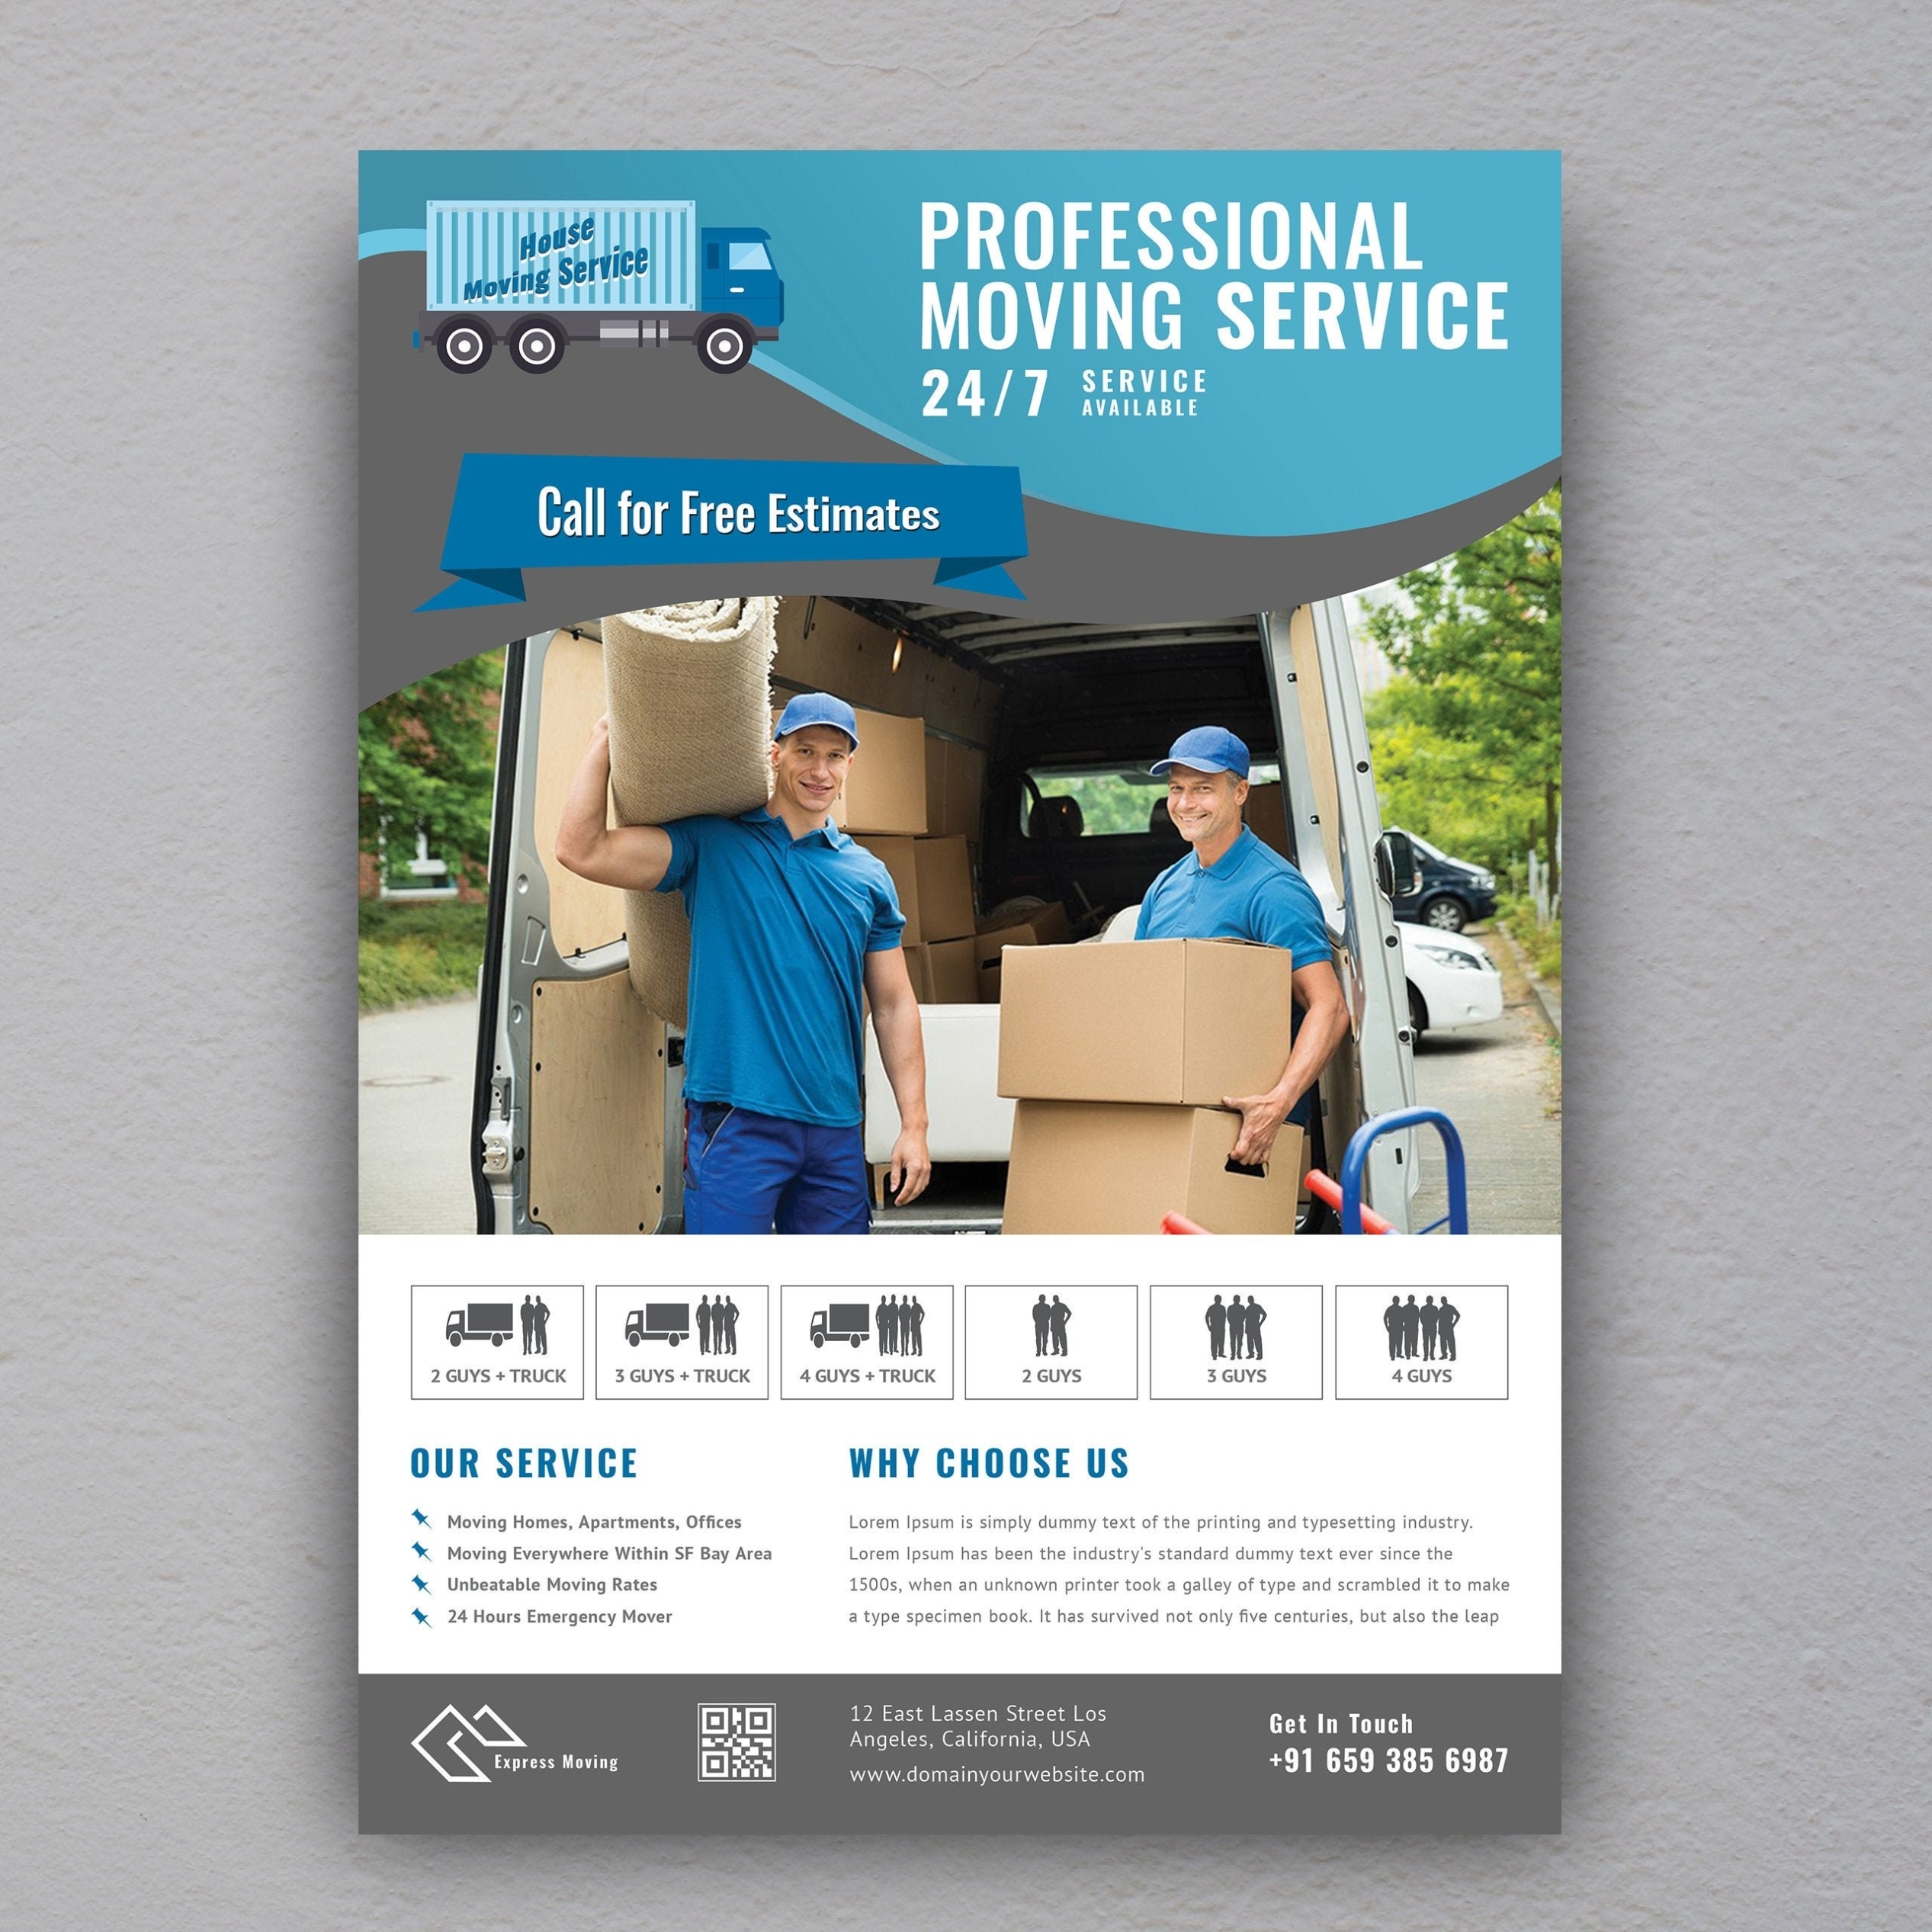 Moving Services Flyer Template Ms Word &amp; Photoshop Files | Etsy with Moving Flyer Template